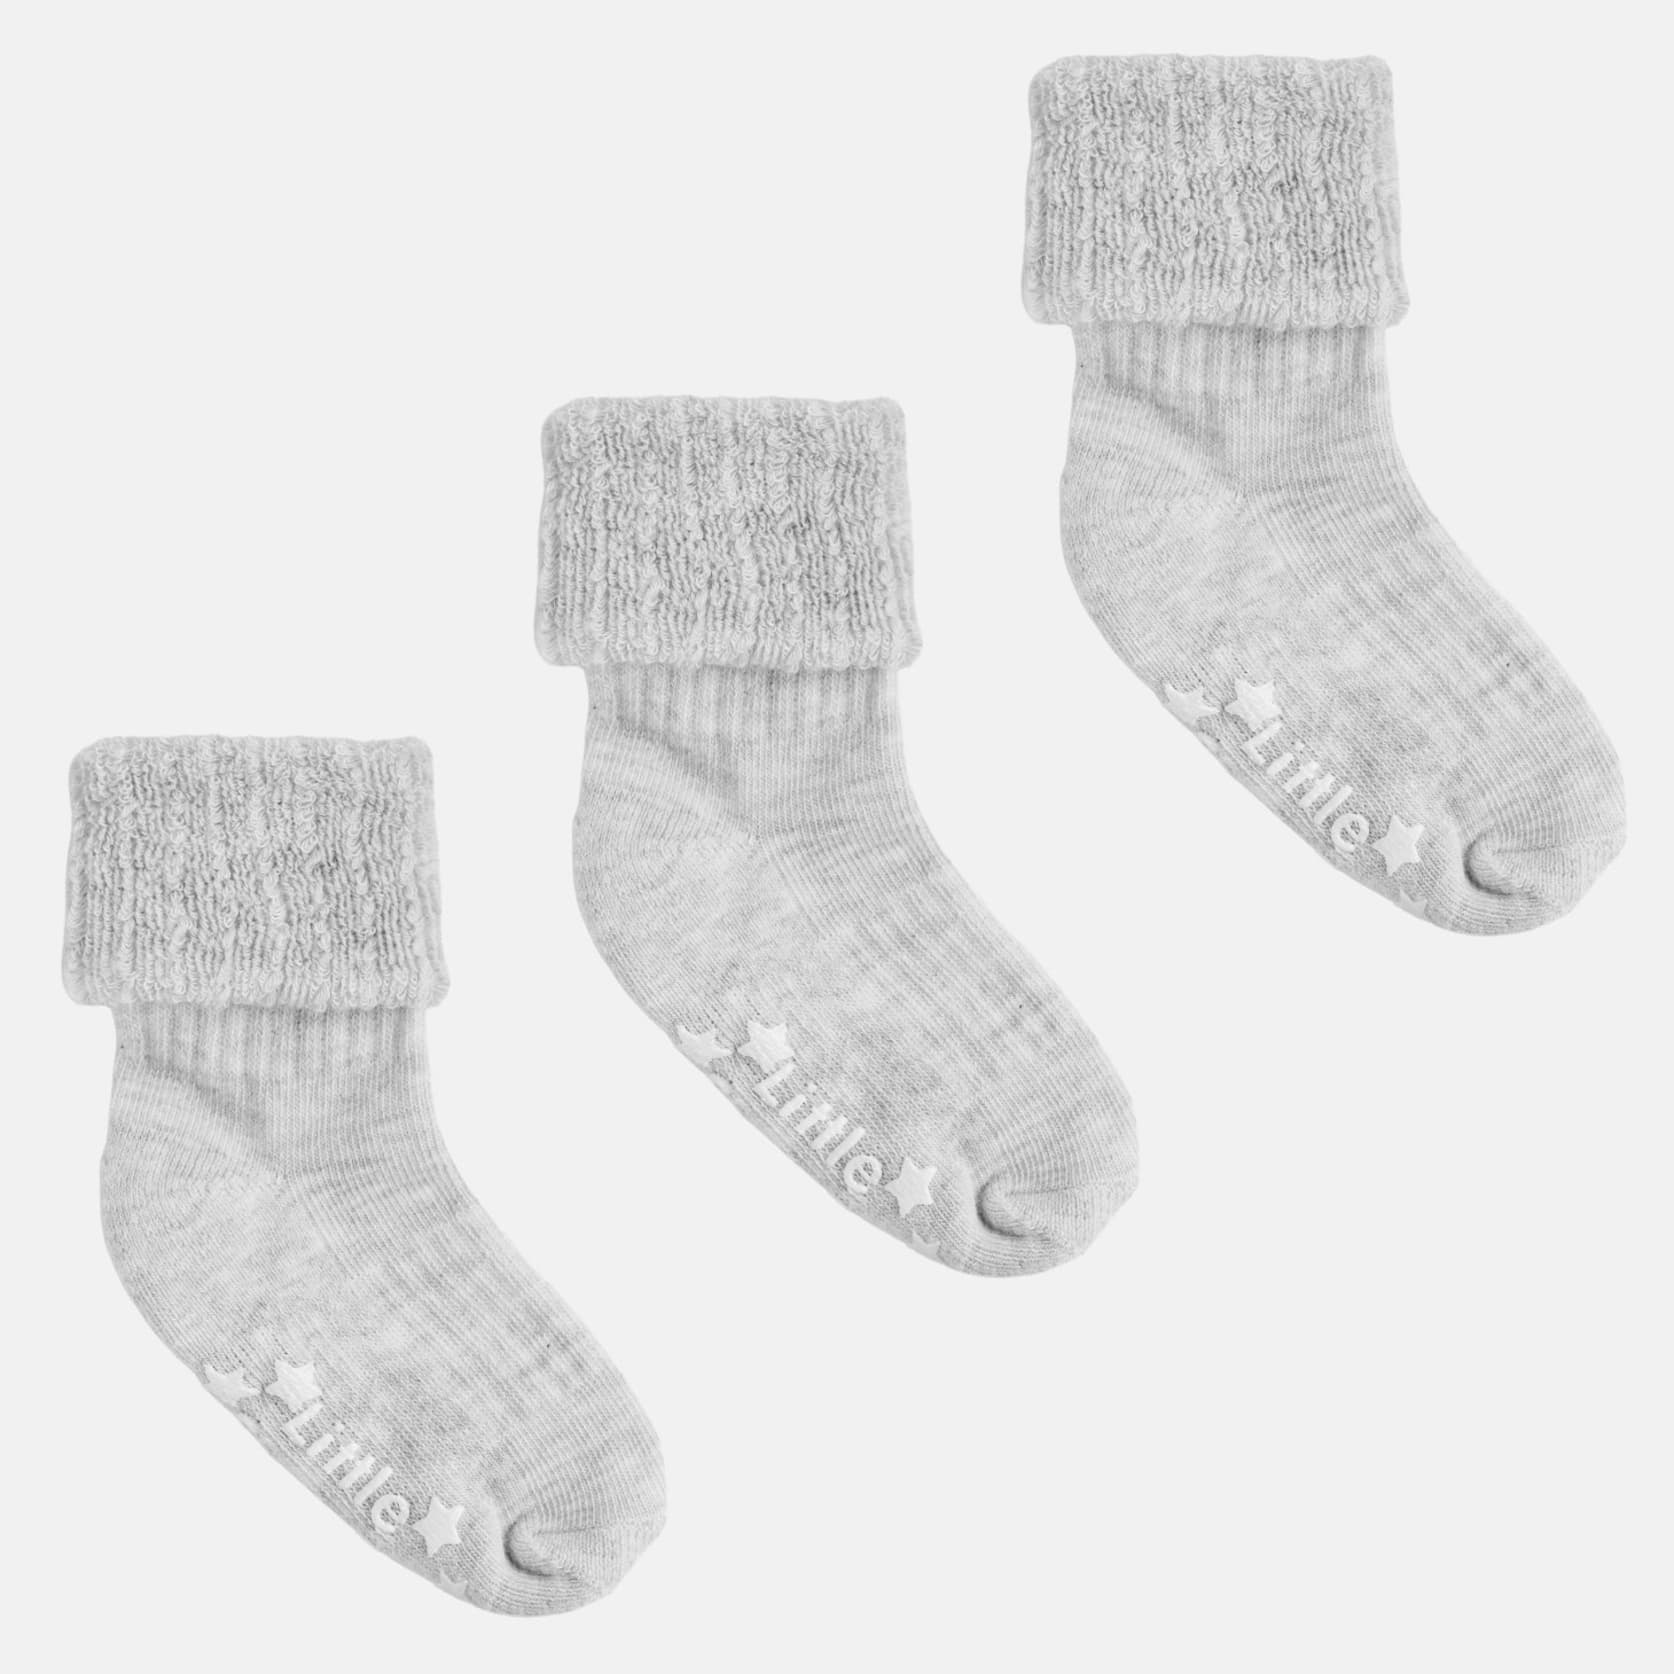 Cosy Stay on Winter Warm Non Slip Baby Socks - 3 Pack in Cloud Grey - 0-3 years